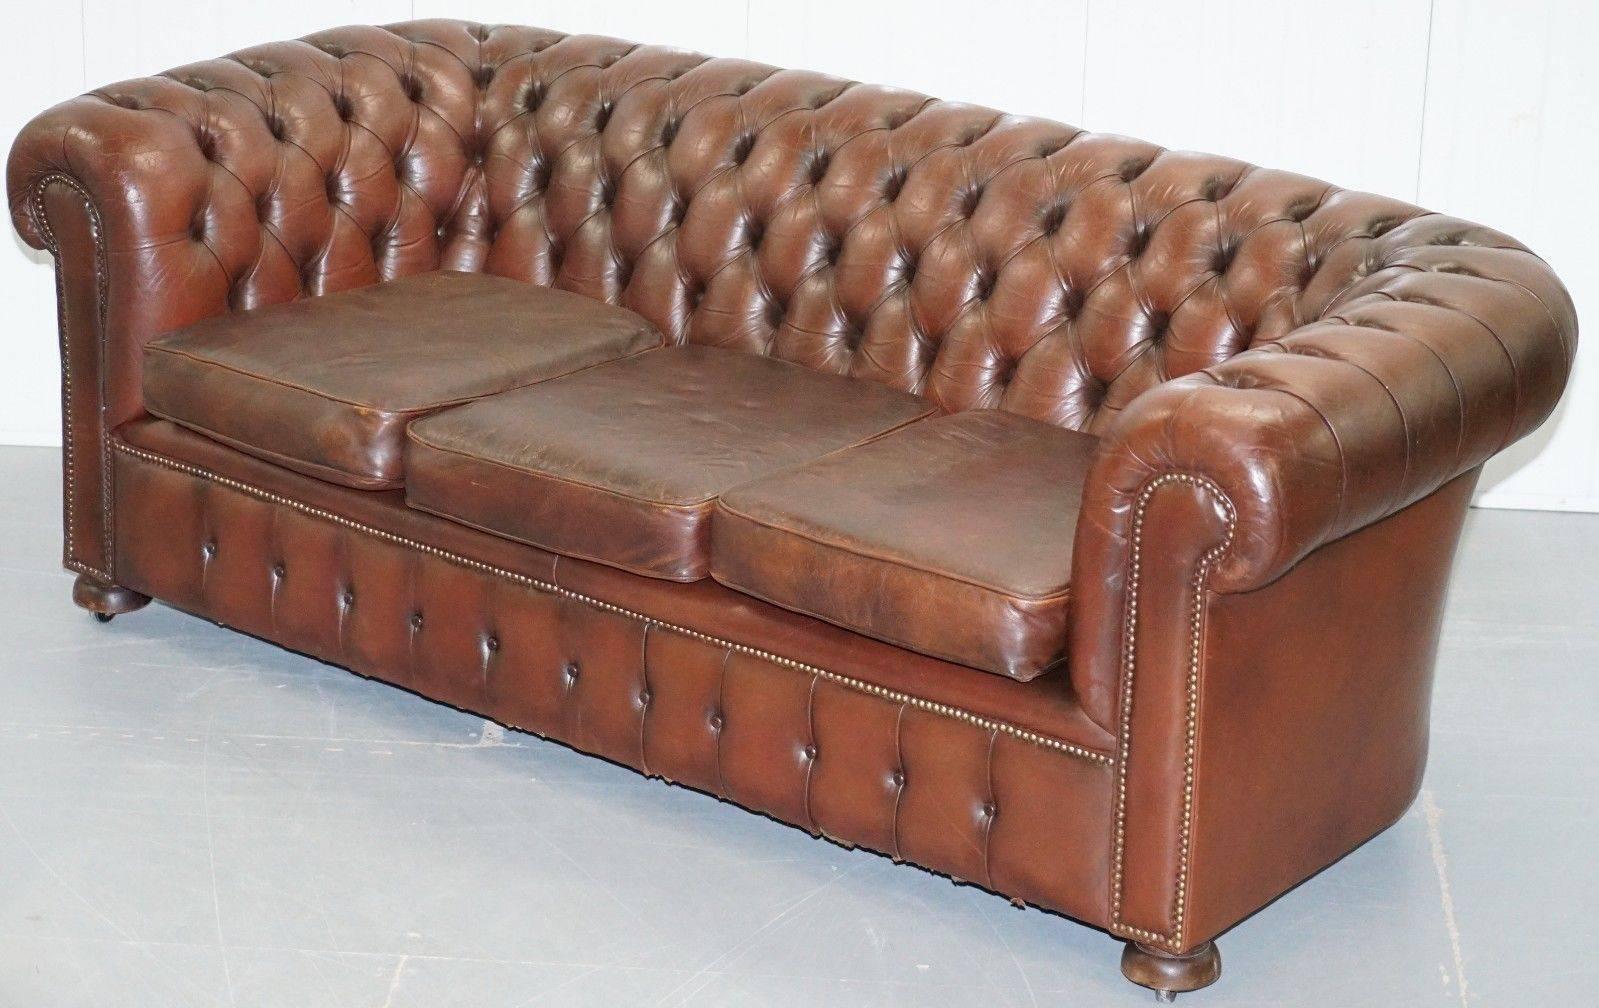 We are delighted to offer for sale this vintage oak framed Mid-Century aged brown leather Chesterfield club sofa

A classic look and design, this is a good old one, handmade in England and built to last.

The upholstery is distressed, it has